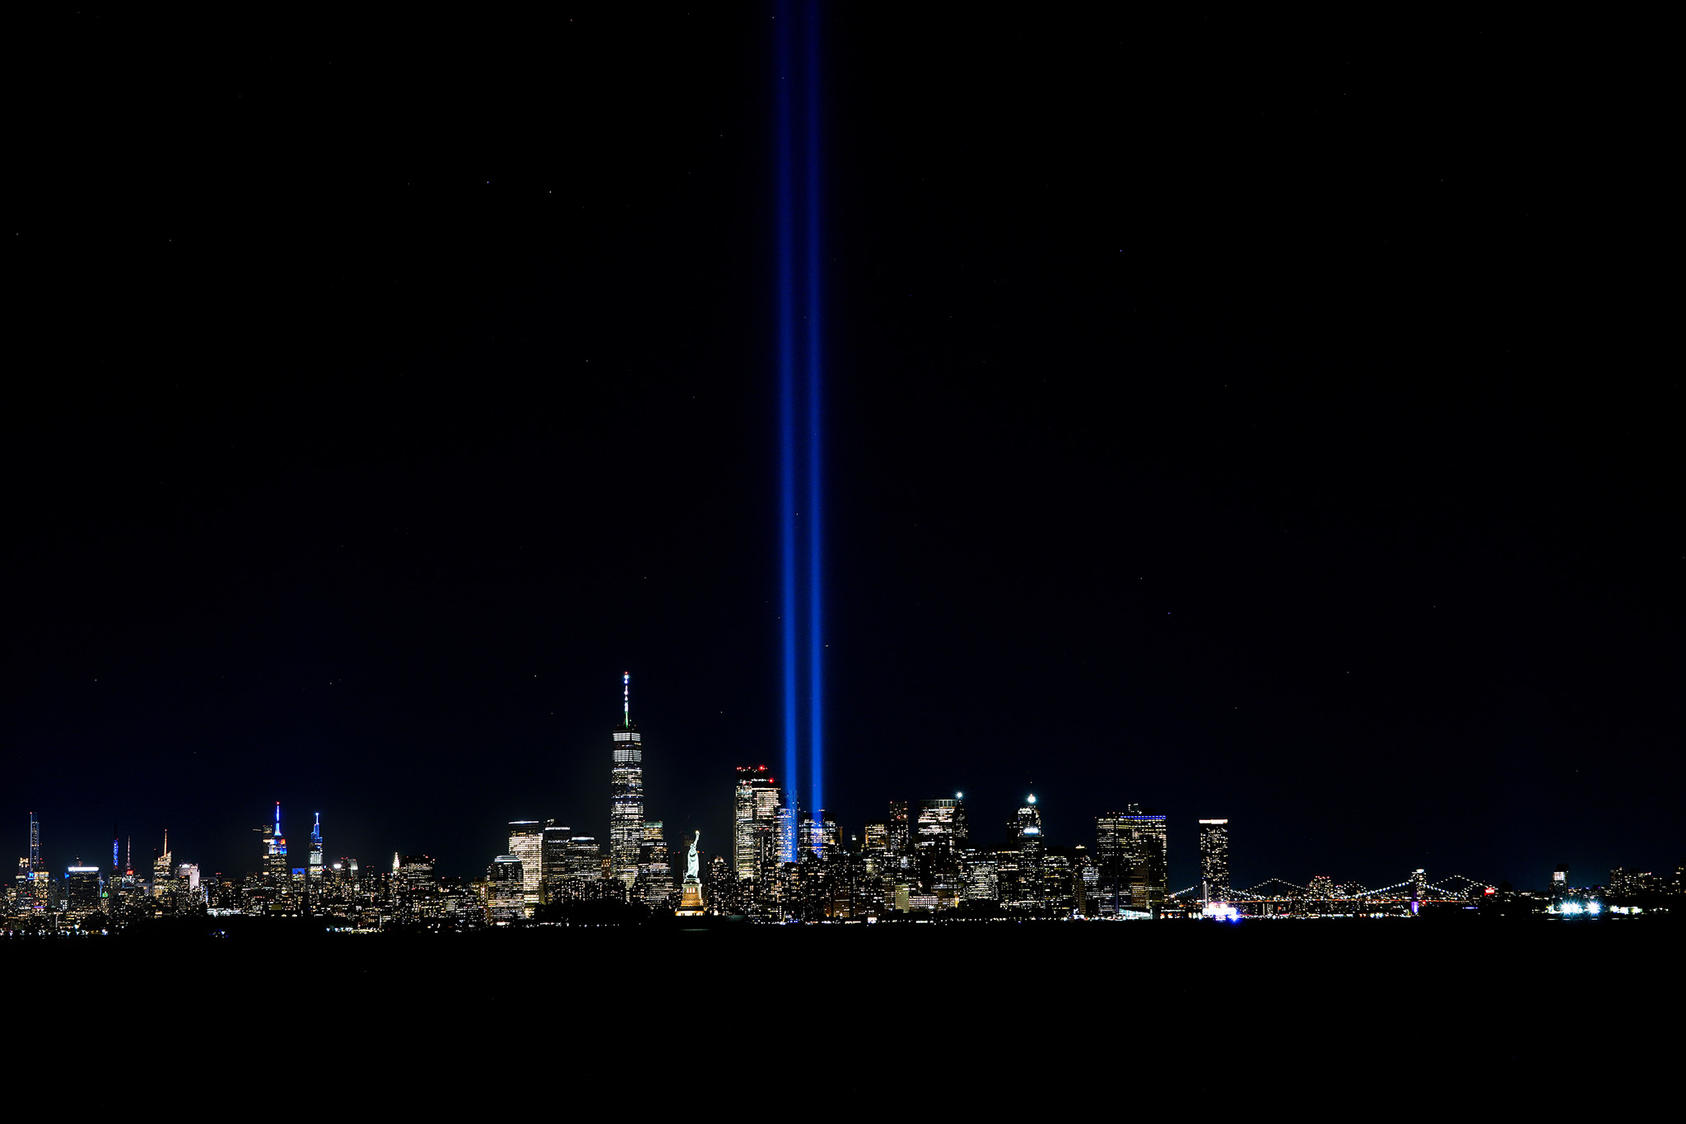 The Tribute In Light shines up from Lower Manhattan on the 20th anniversary of the 9/11 terror attacks on September 11, 2021 in New York City. (Chip Somodevilla/New York Times/Getty Images)